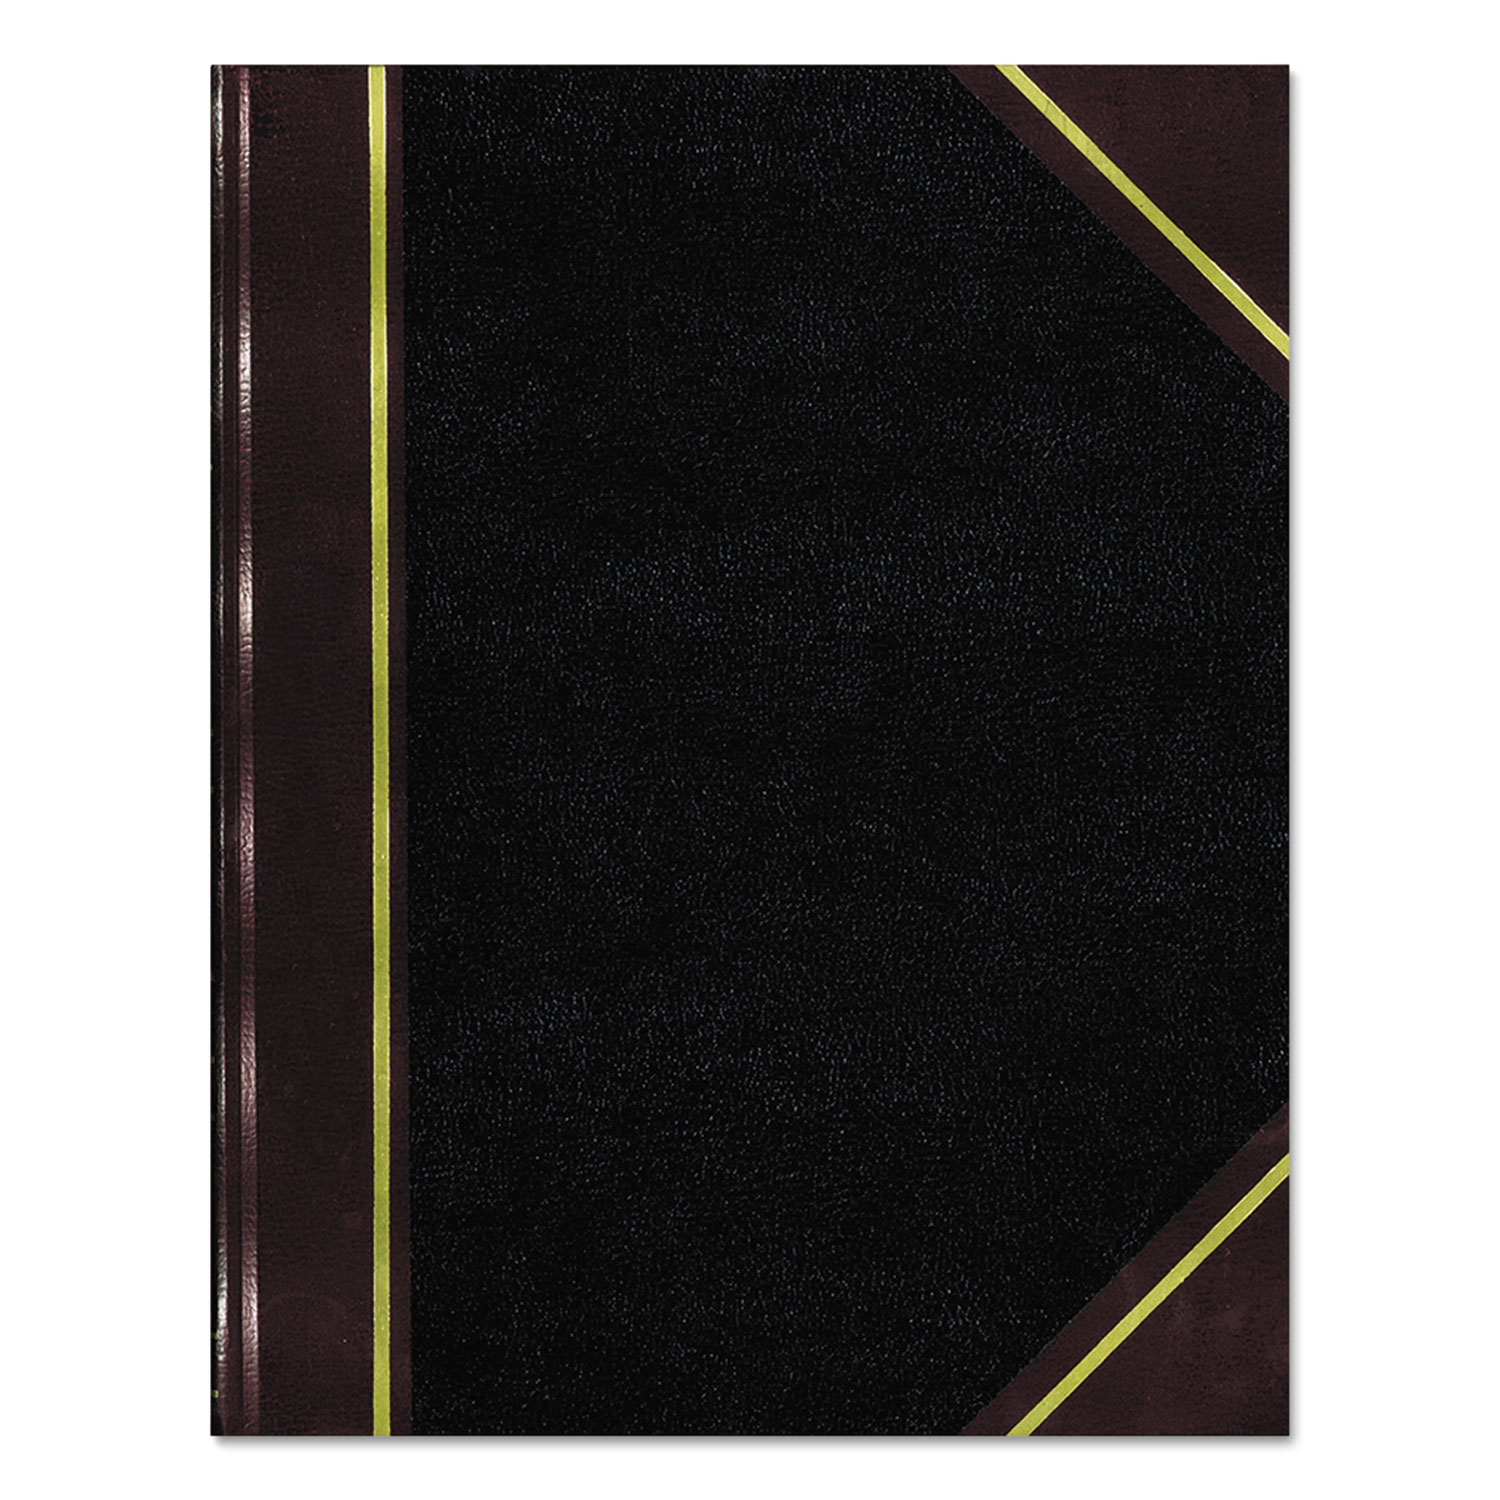  National 56231 Texthide Record Book, Black/Burgundy, 300 Green Pages, 10 3/8 x 8 3/8 (RED56231) 